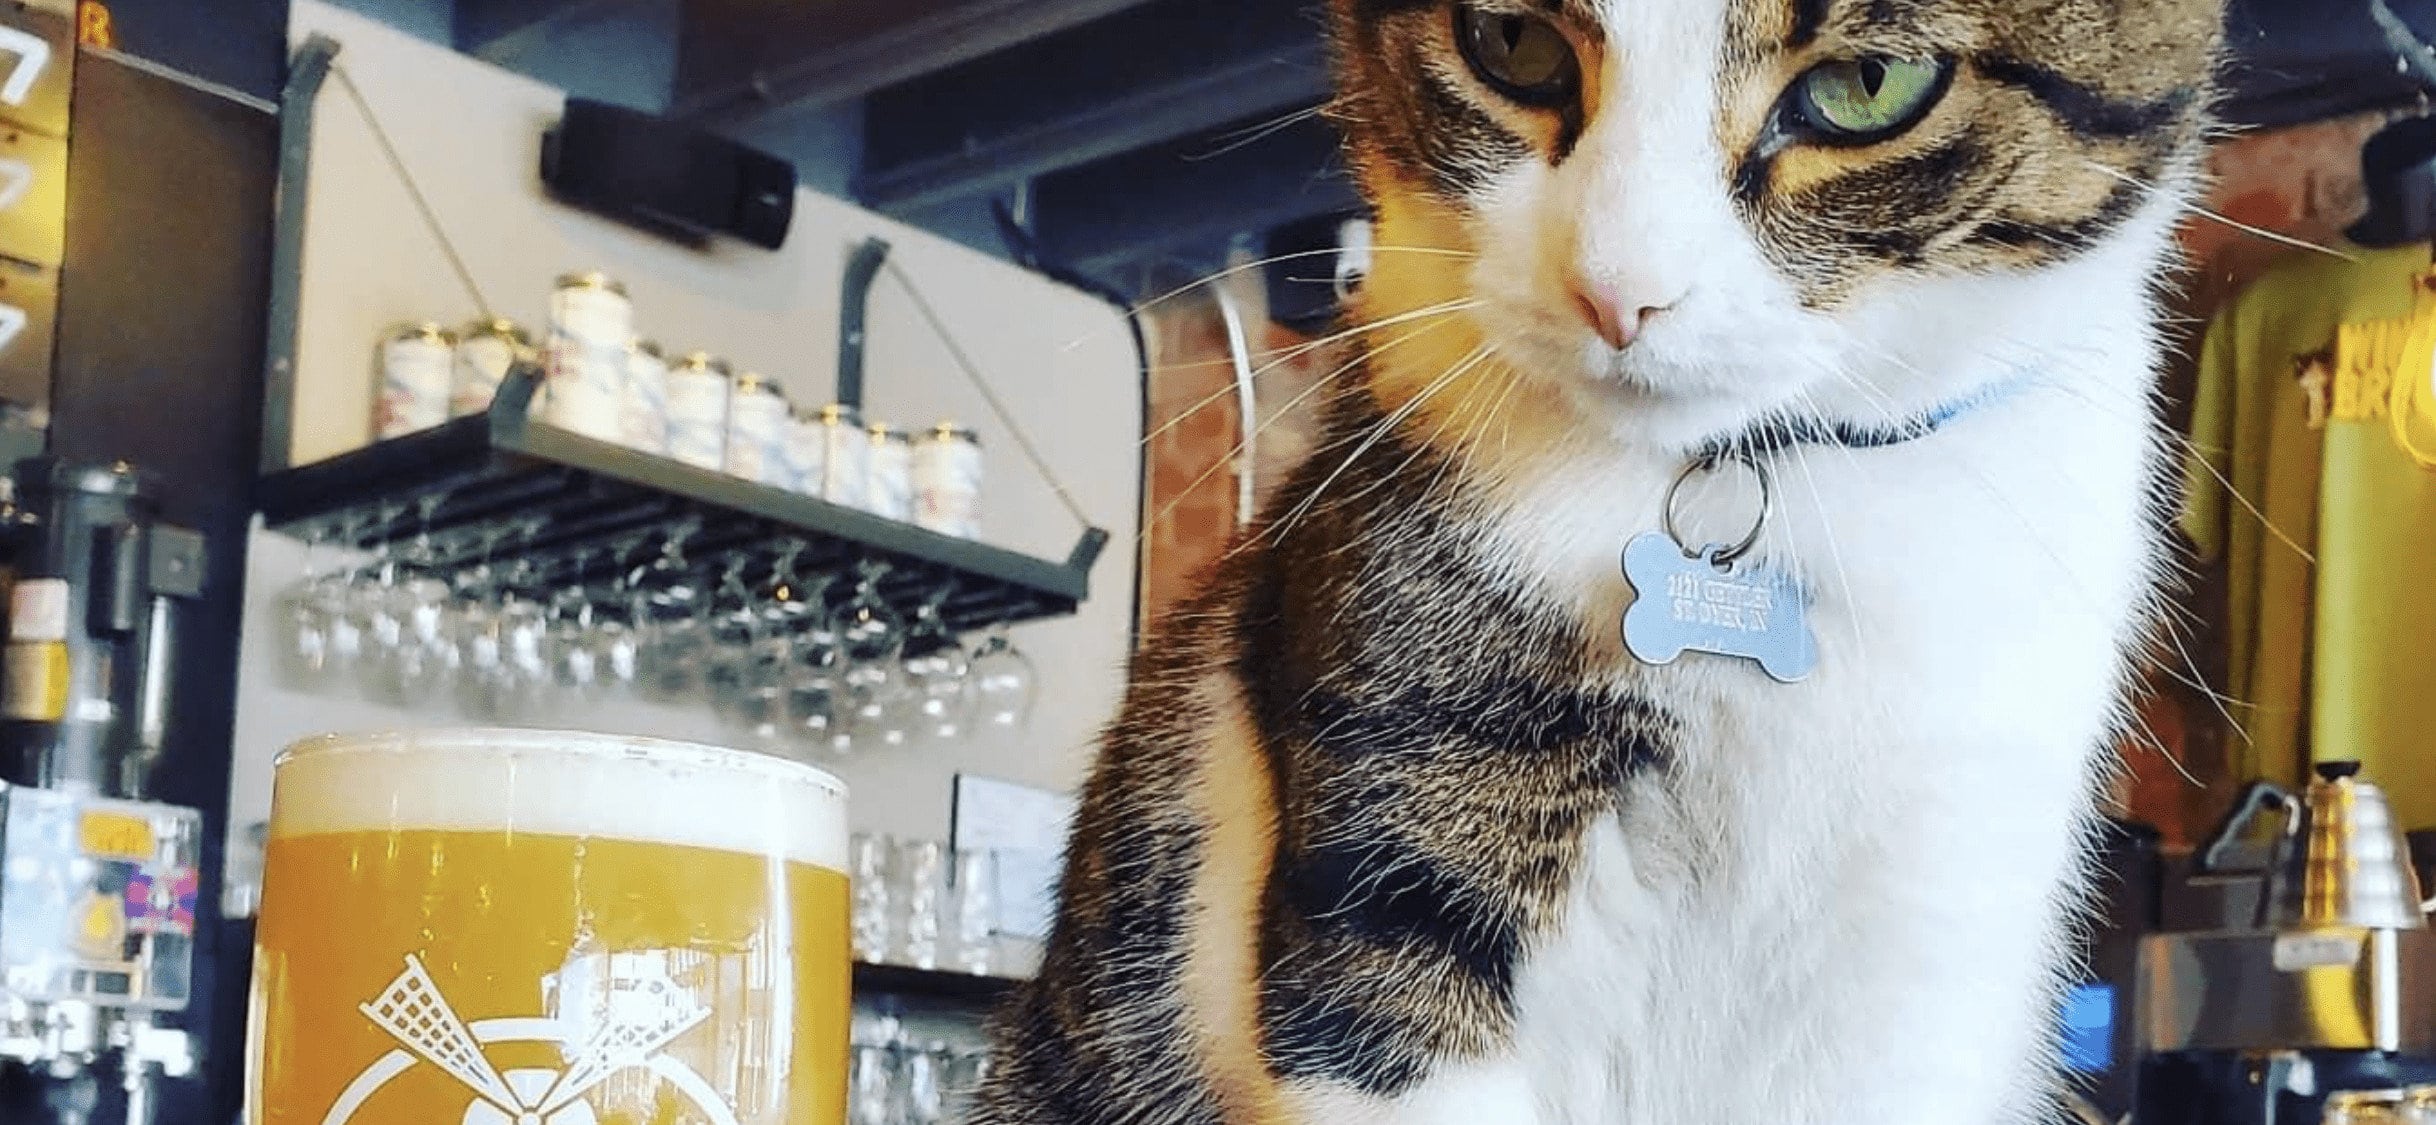 Luther the cat standing next to a full Windmill Brewing beer.